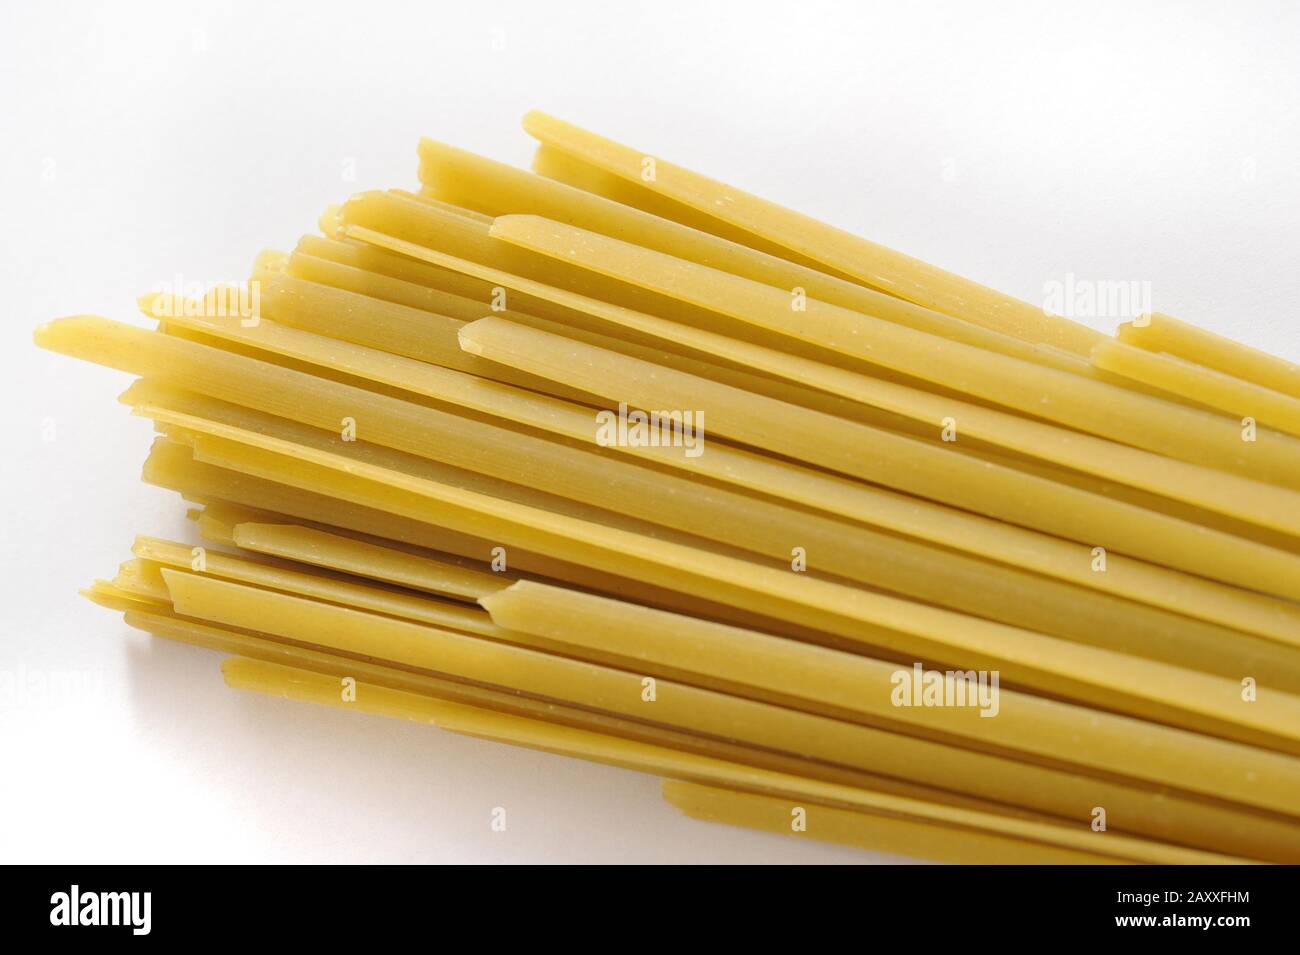 Bundle of traditional dried Italian tagliatelli pasta for use in Mediterranean cuisine on a white background with copyspace Stock Photo